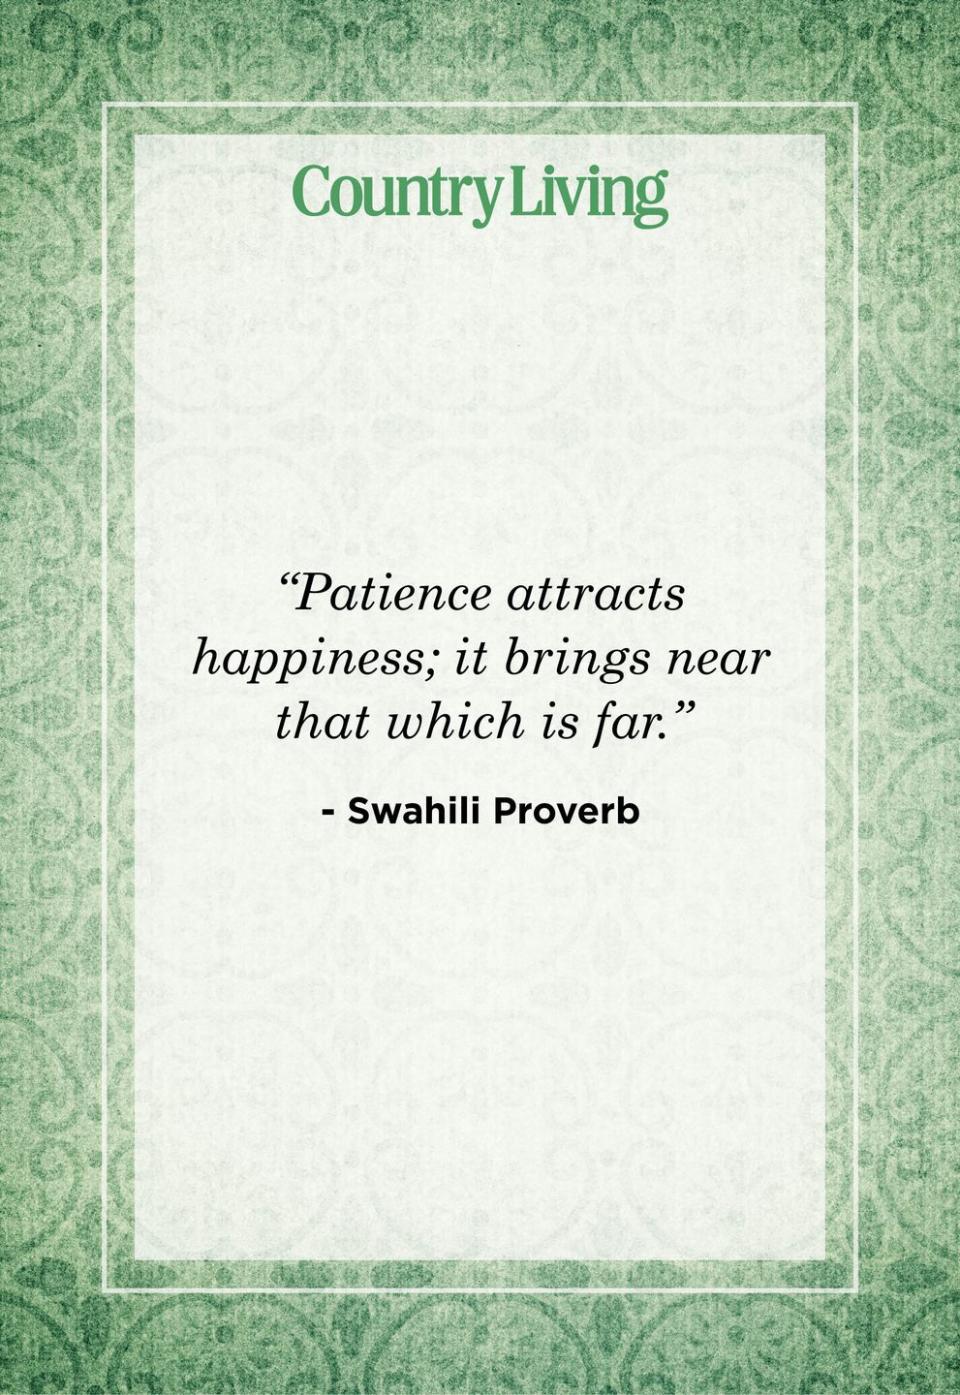 <p>“Patience attracts happiness; it brings near that which is far.”</p>